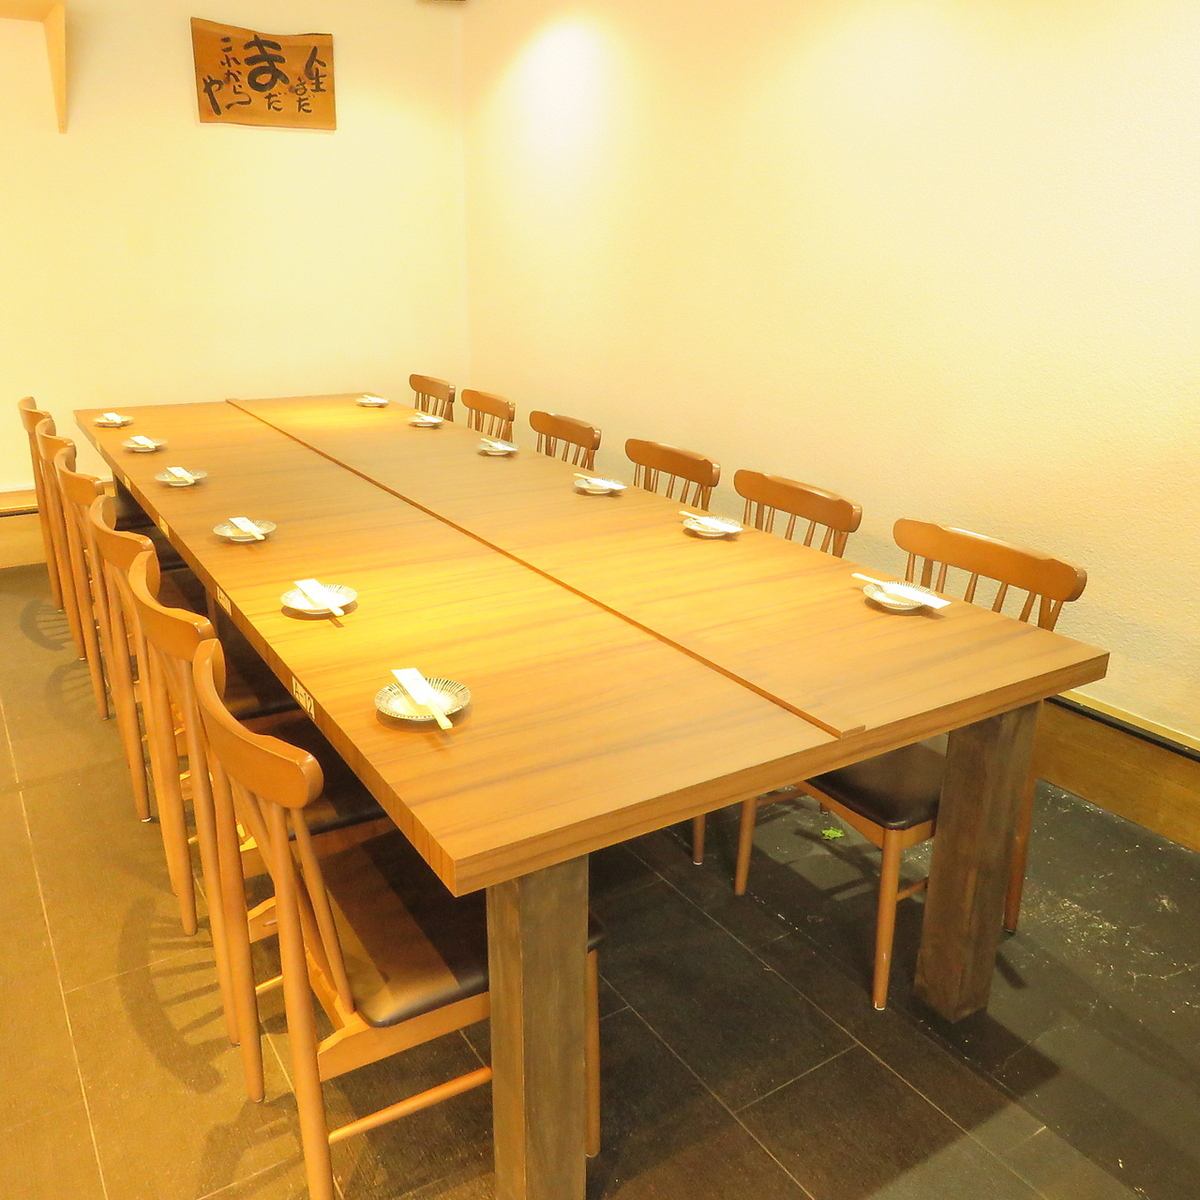 [For parties♪] We can rent a private table room for up to 40 people!